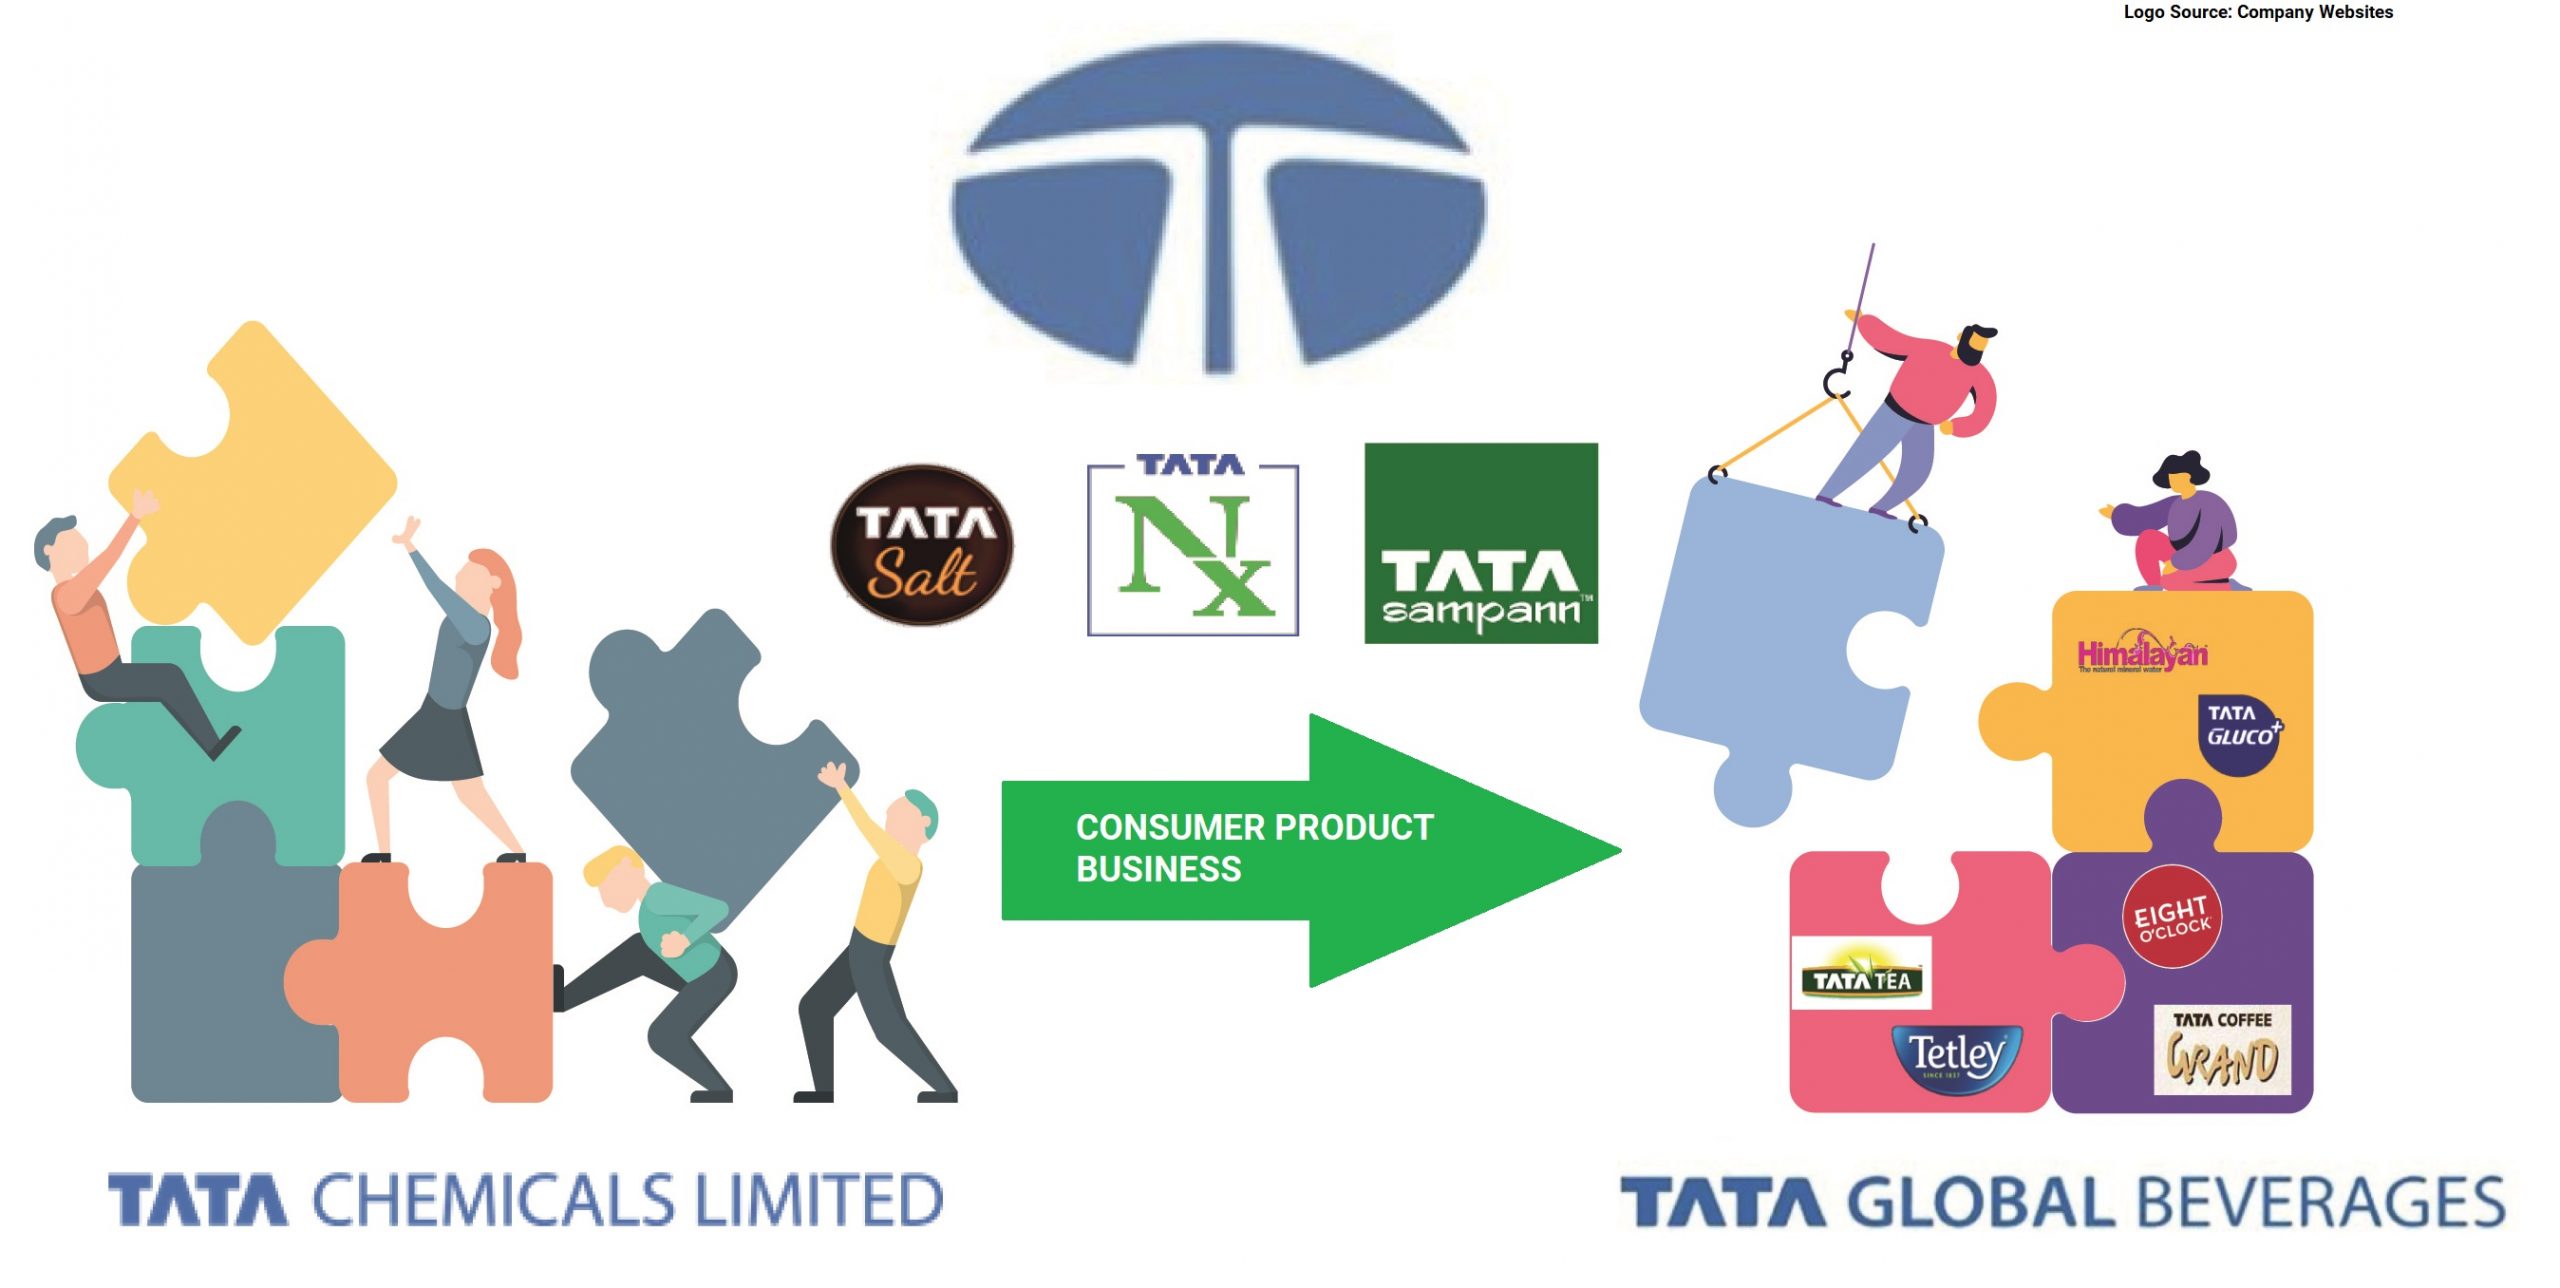 Tata-Global-Beverages-Acquisitions-Food-Business-Tata-Chemicals